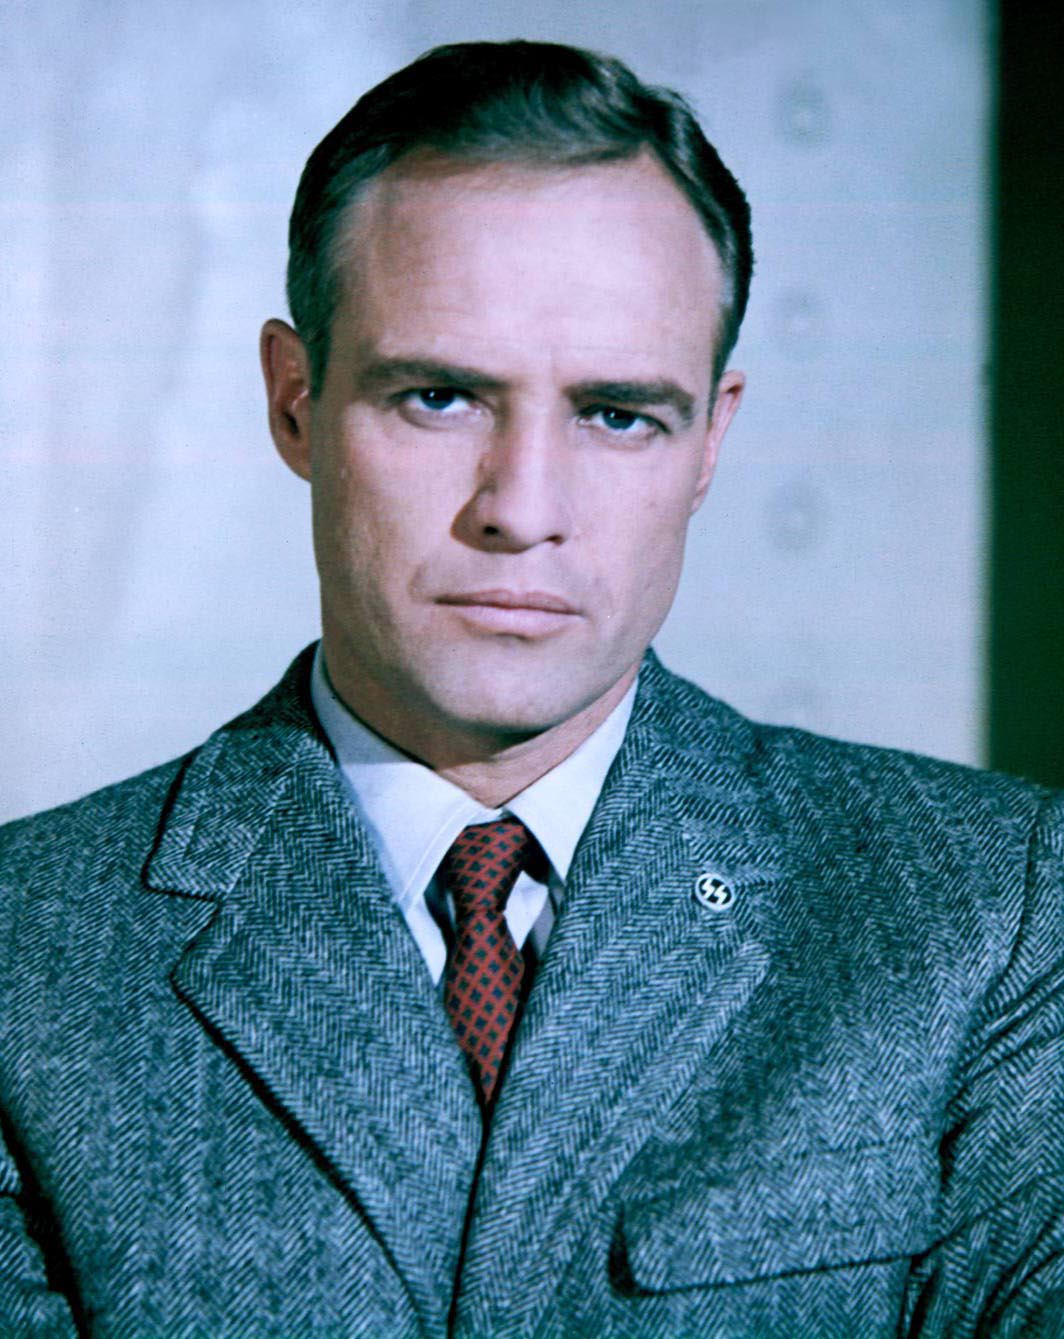 Marlon Brando photographed in January 04, 1967 | Source: Getty Images